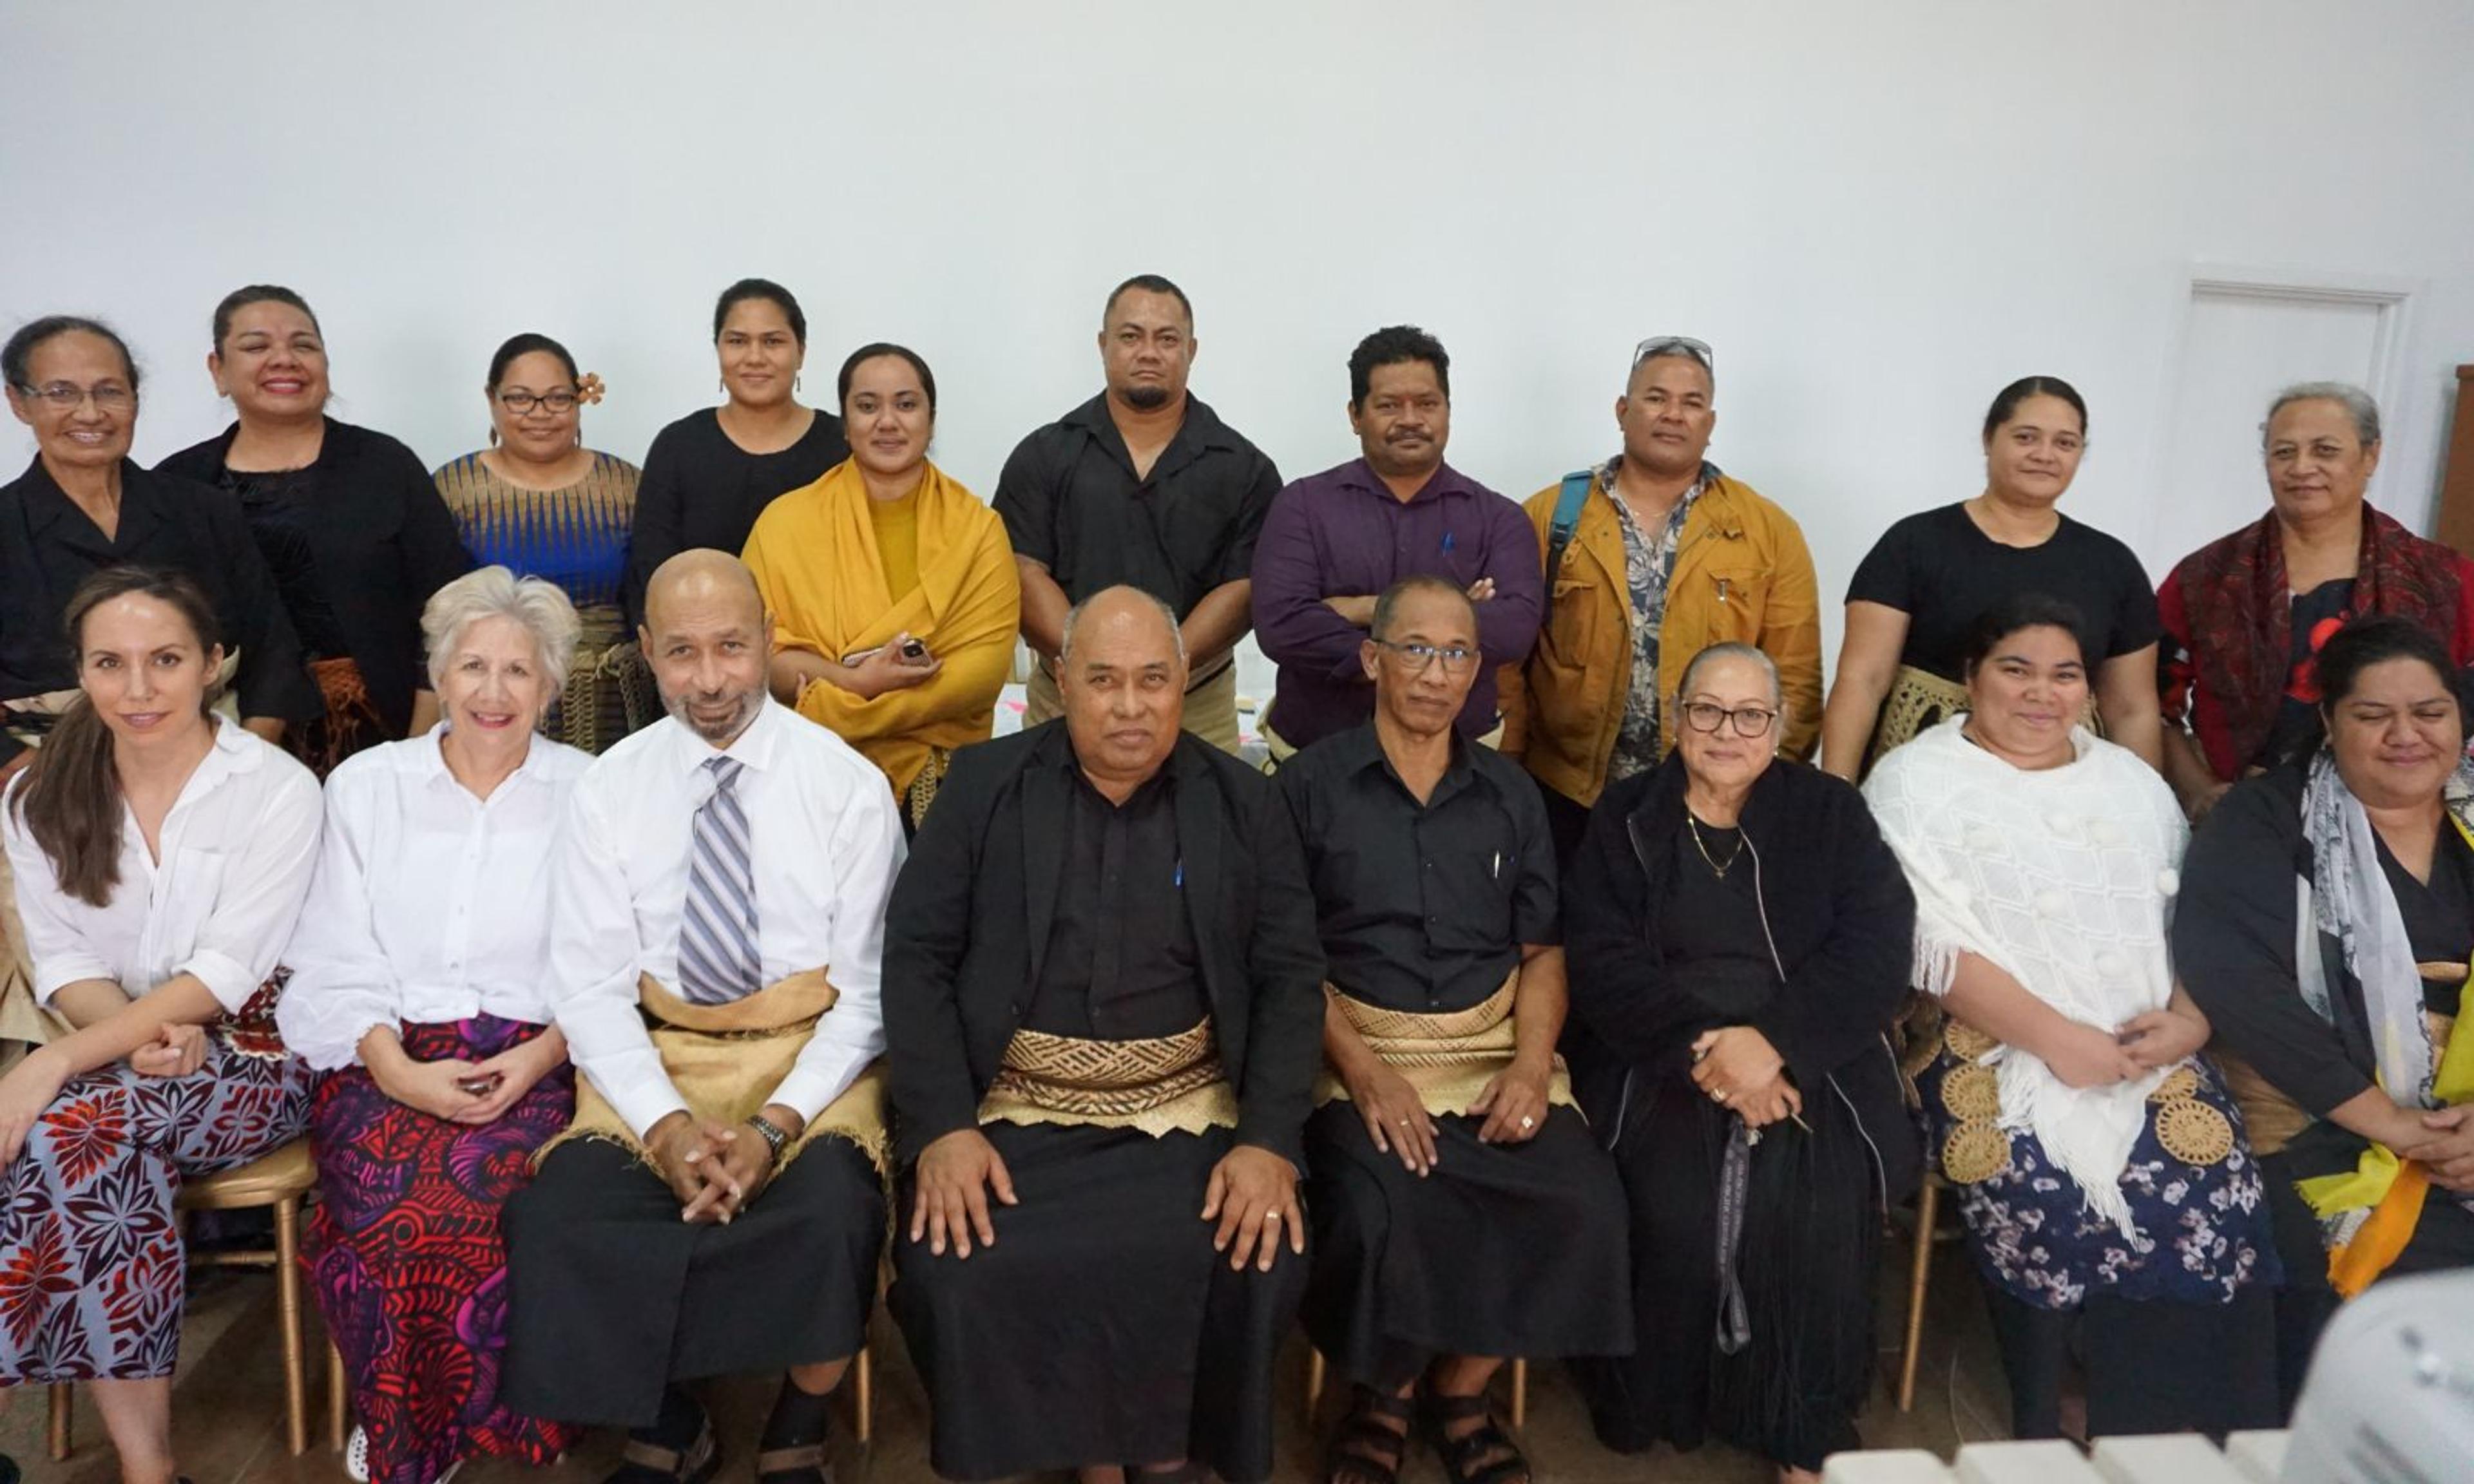 Climate mobility research conducted in Tonga and Samoa has found a small number of Tongan women are willing to move away in light of climate challenges. Photo taken at a Future scenarios workshop in Nuku’alofa Tonga, July 2023.